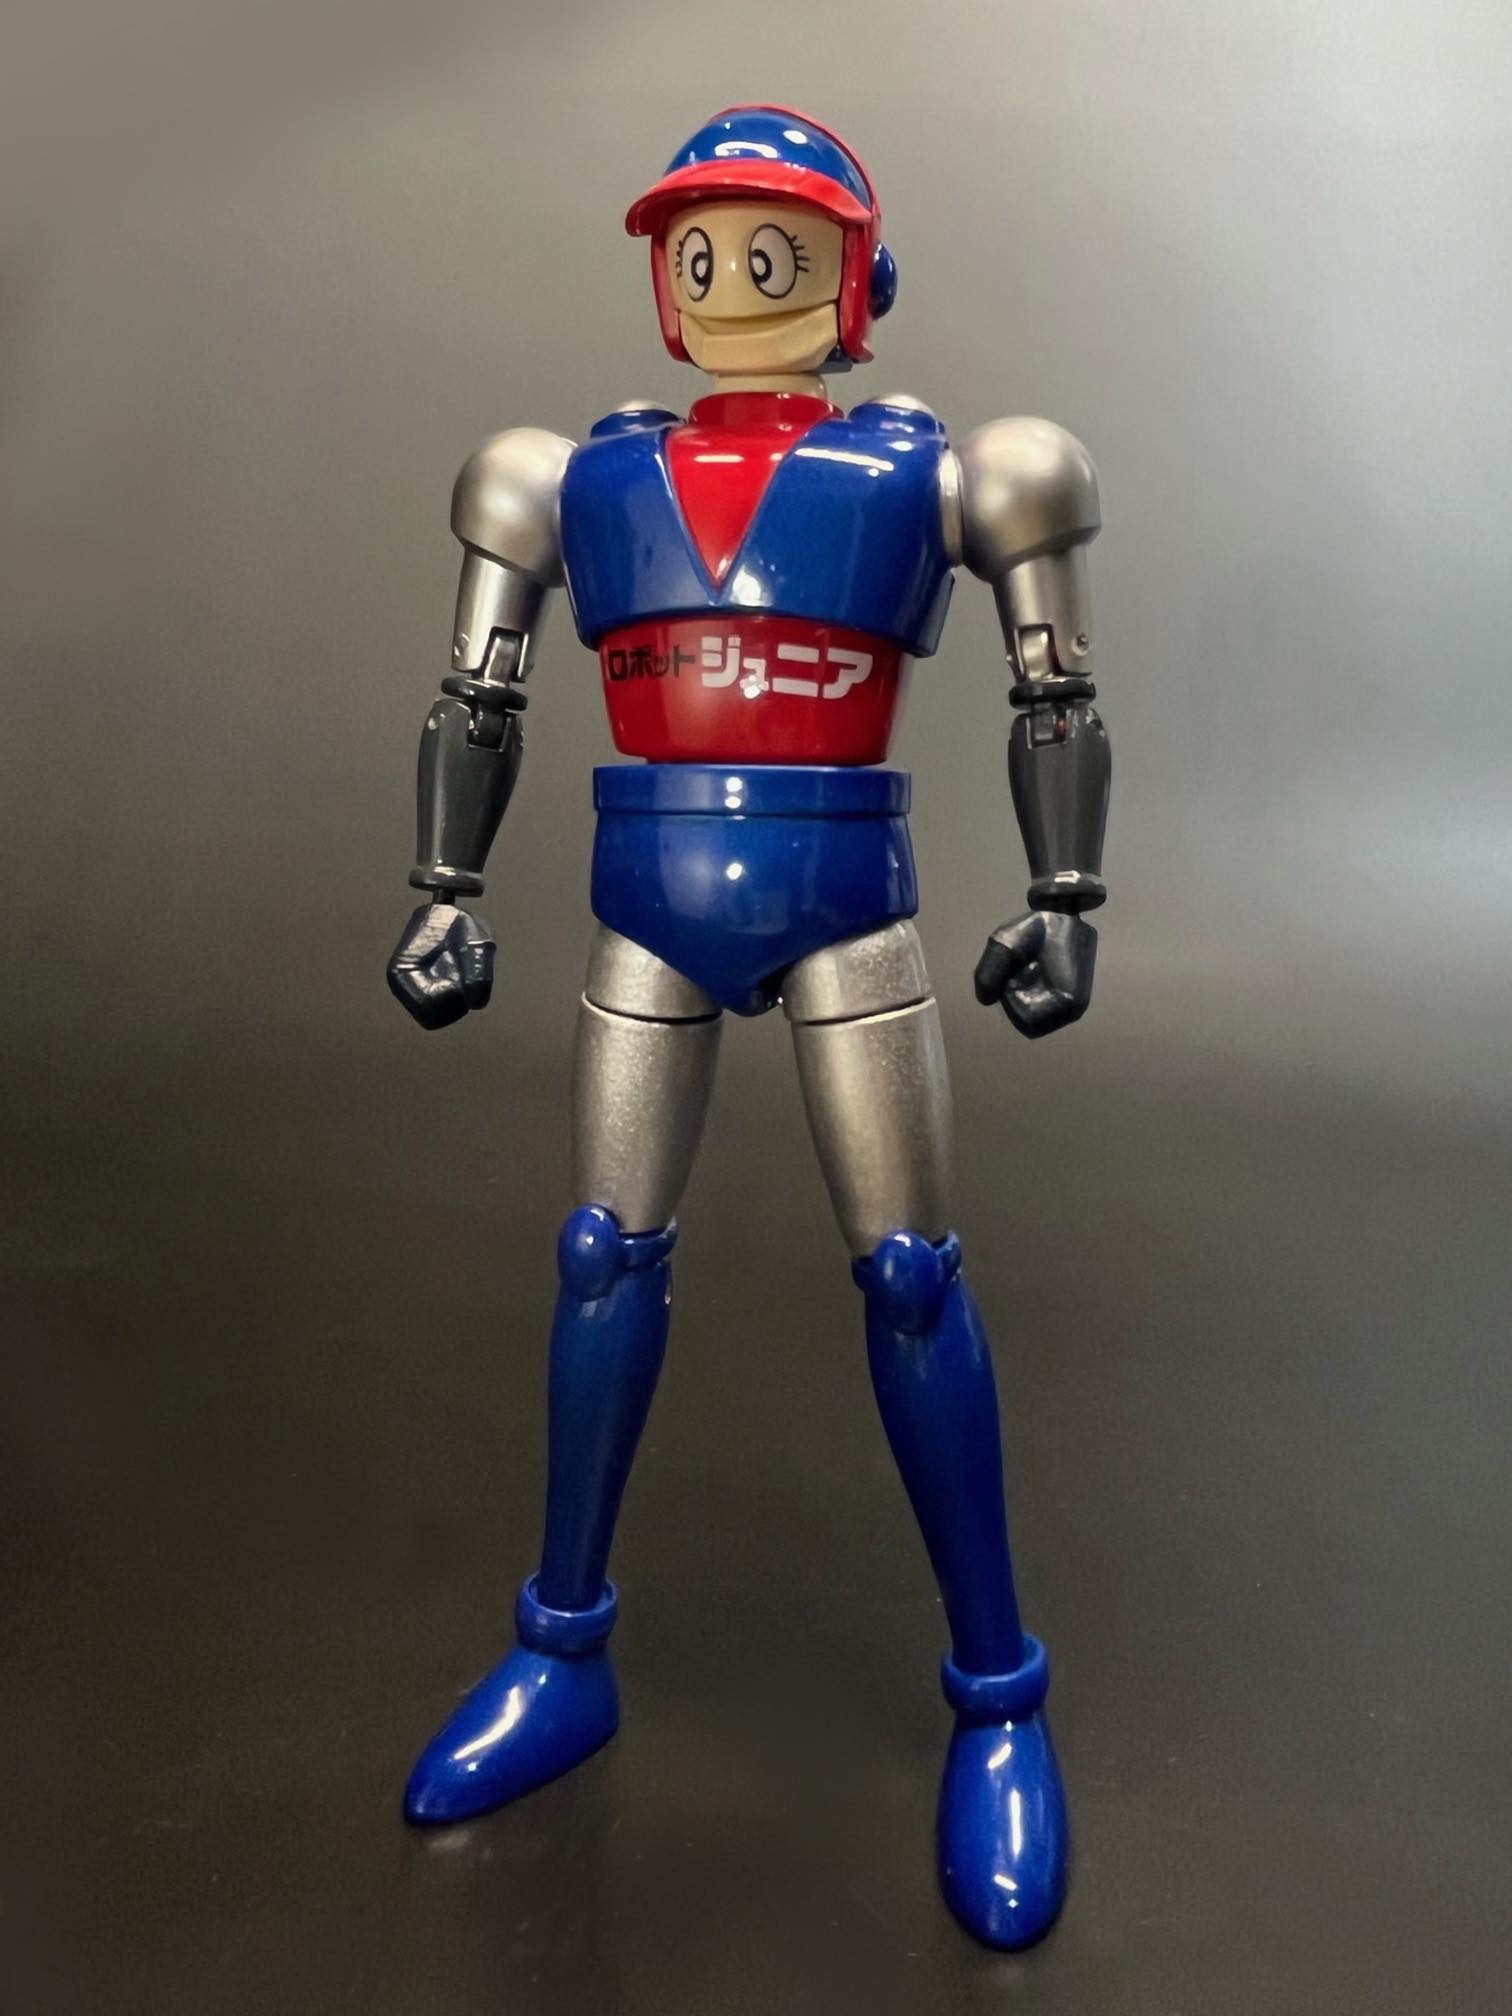 Bandai America Expands Anime Heroes Action Figure Collection - The Toy Book